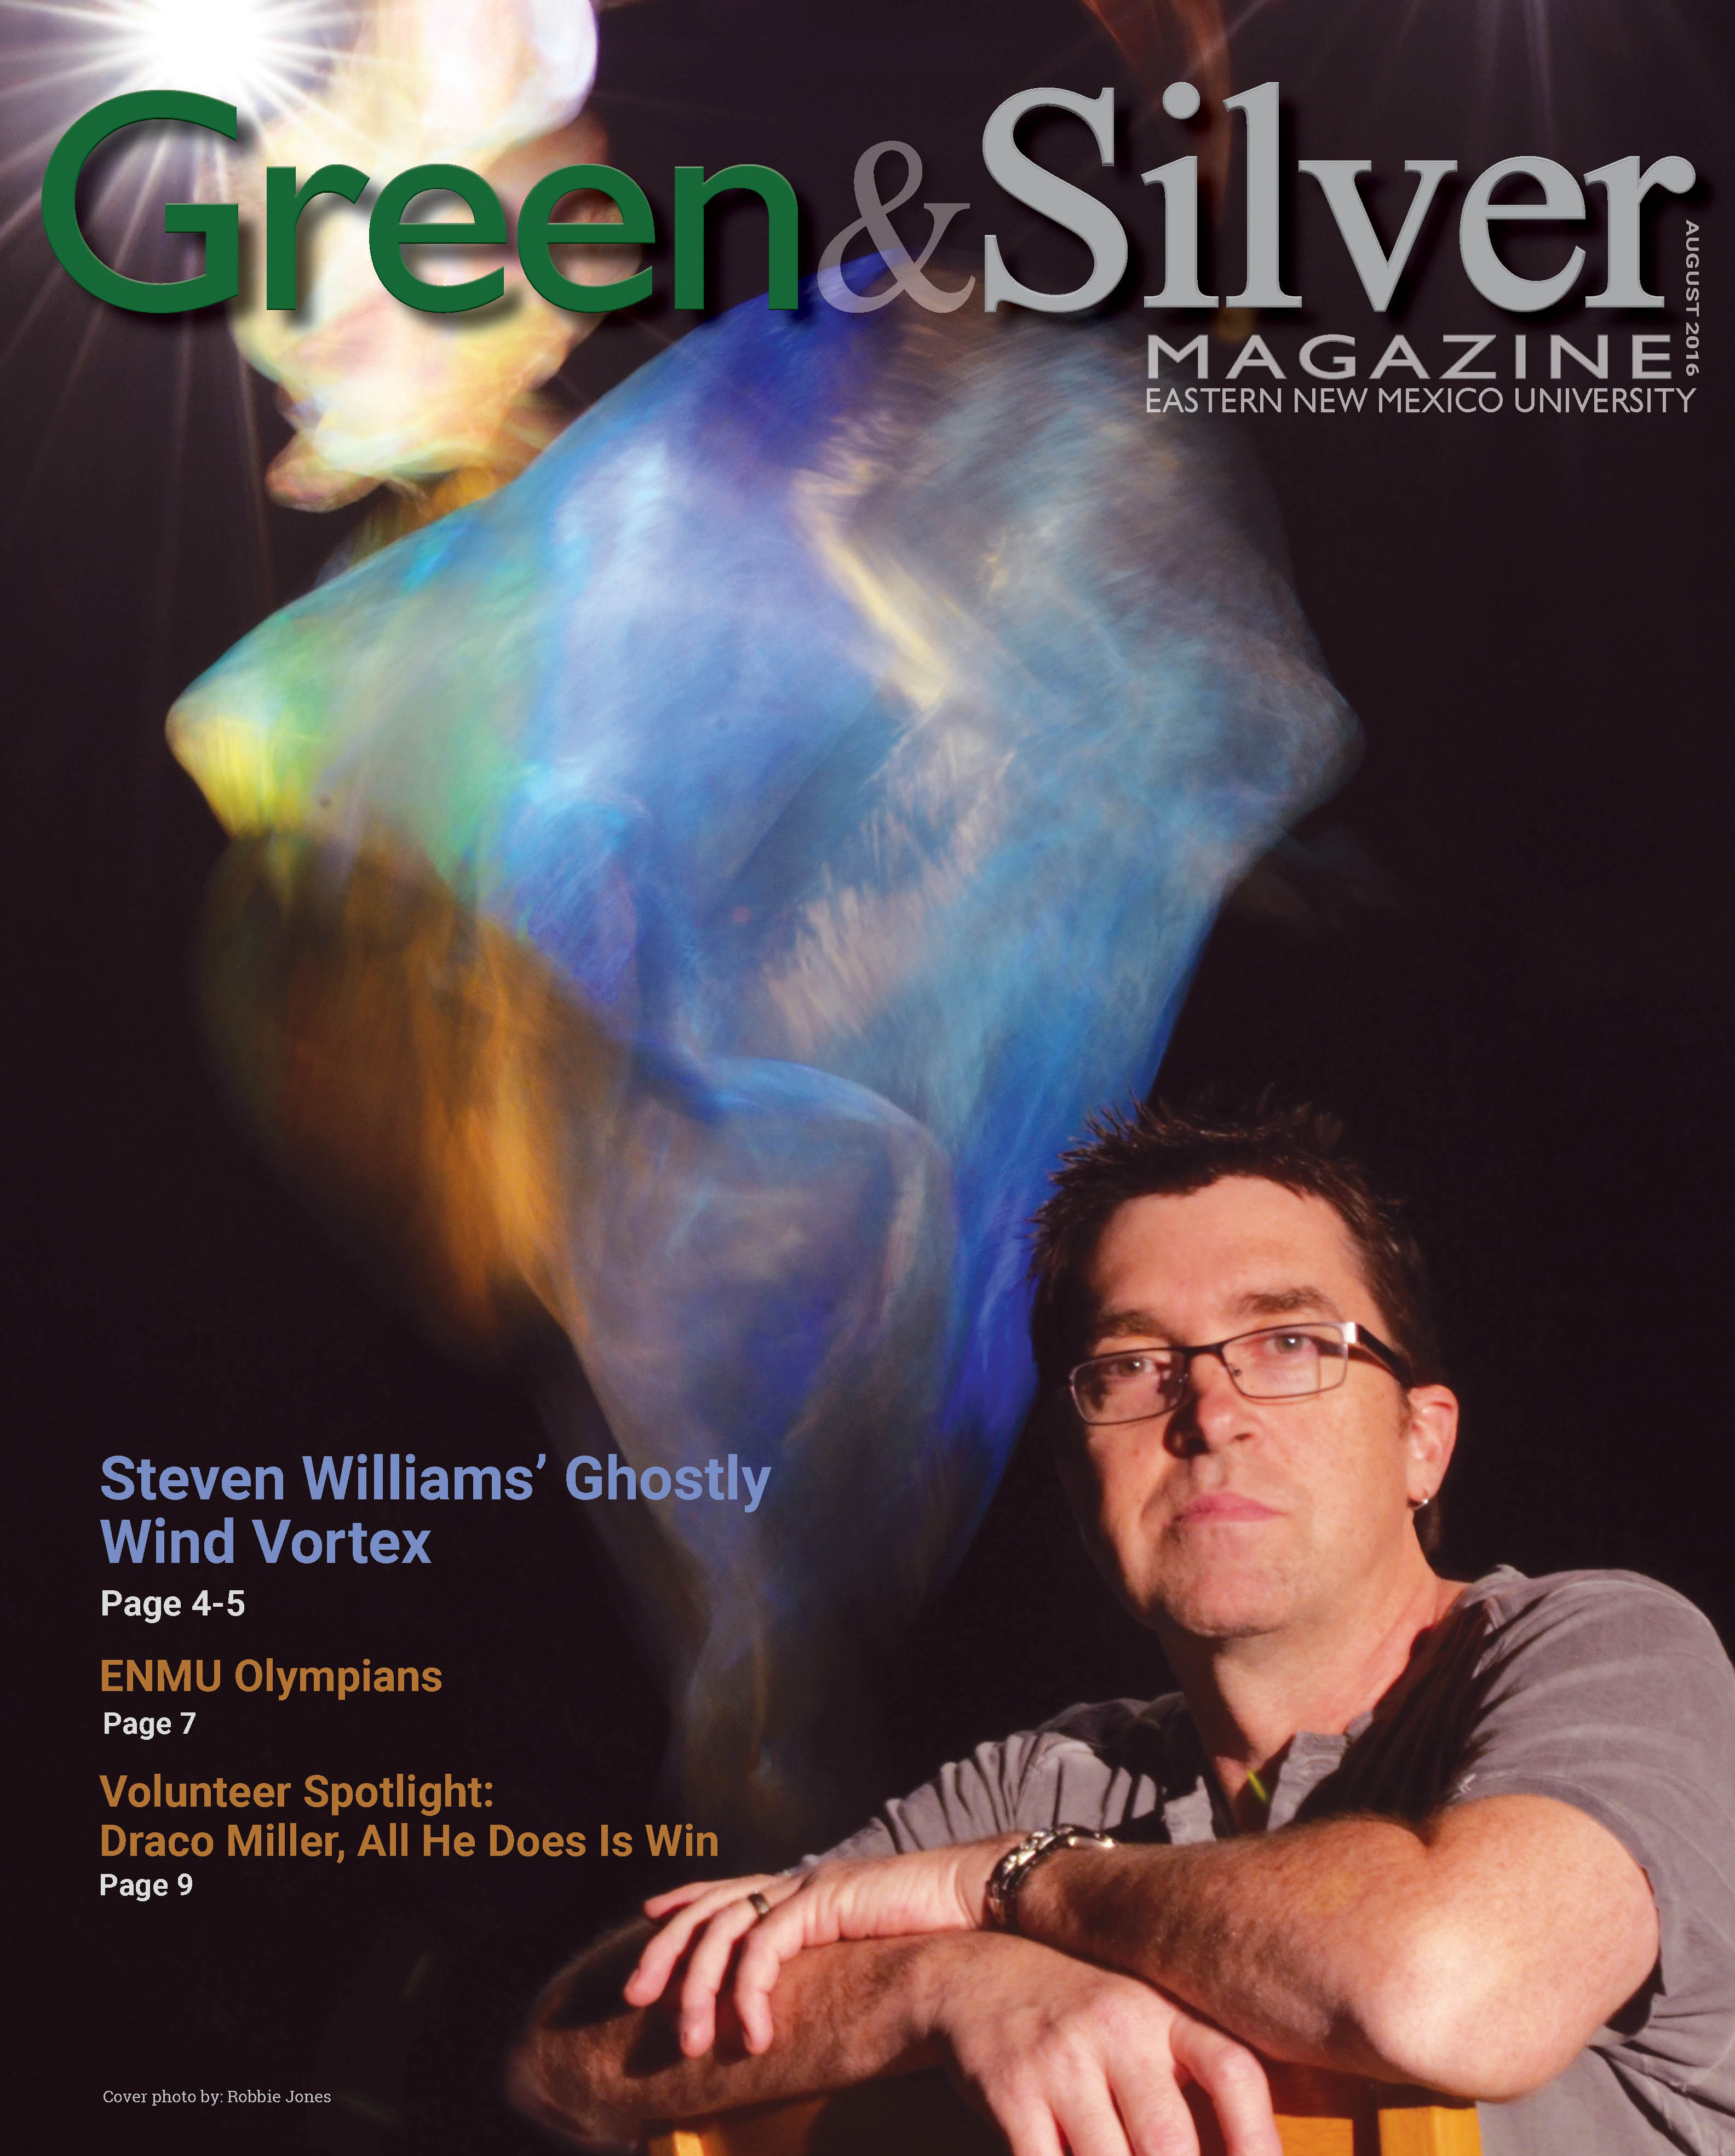 Green & Silver Magazine August 2016 cover